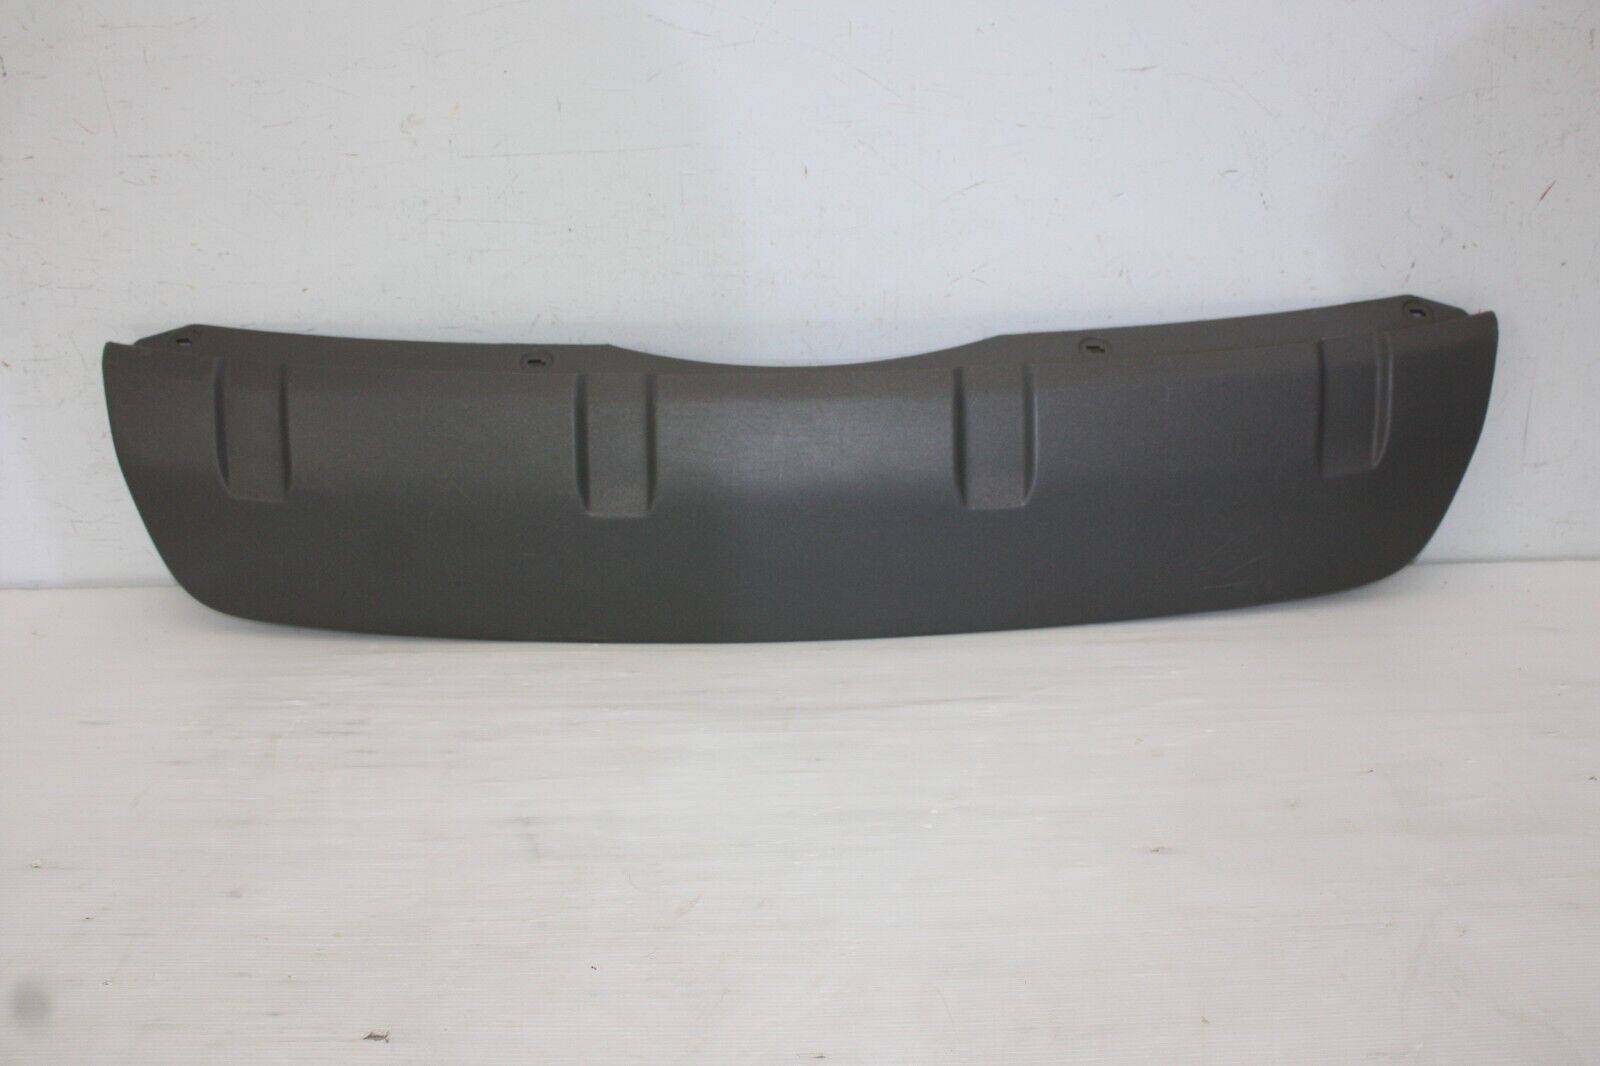 Land-Rover-Discovery-Rear-Bumper-Tow-Eye-Cover-2017-ON-HY32-17K950-AA-Genuine-175585706077